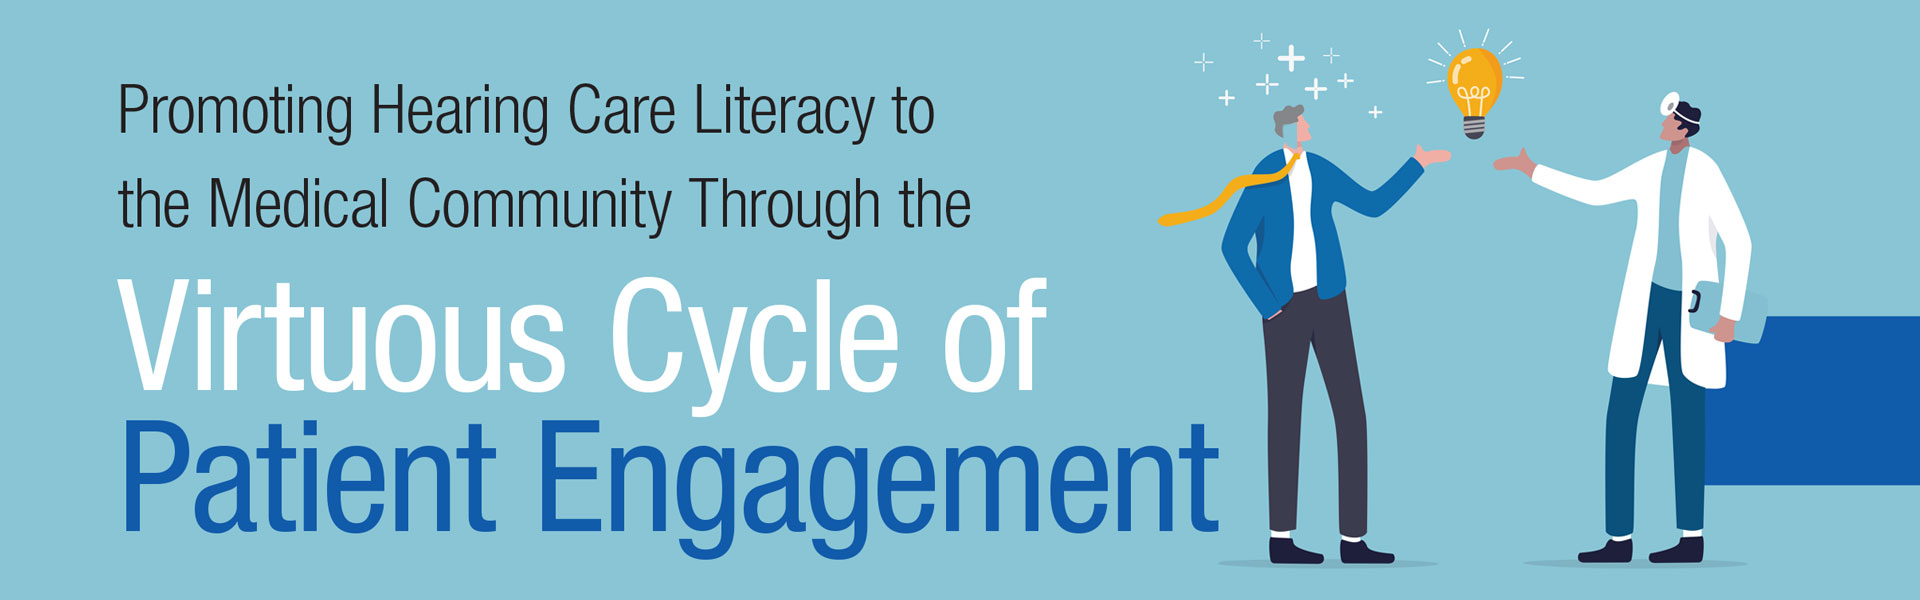 Promoting Hearing Care Literacy to the Medical Community Through the Virtuous Cycle of Patient Engagement